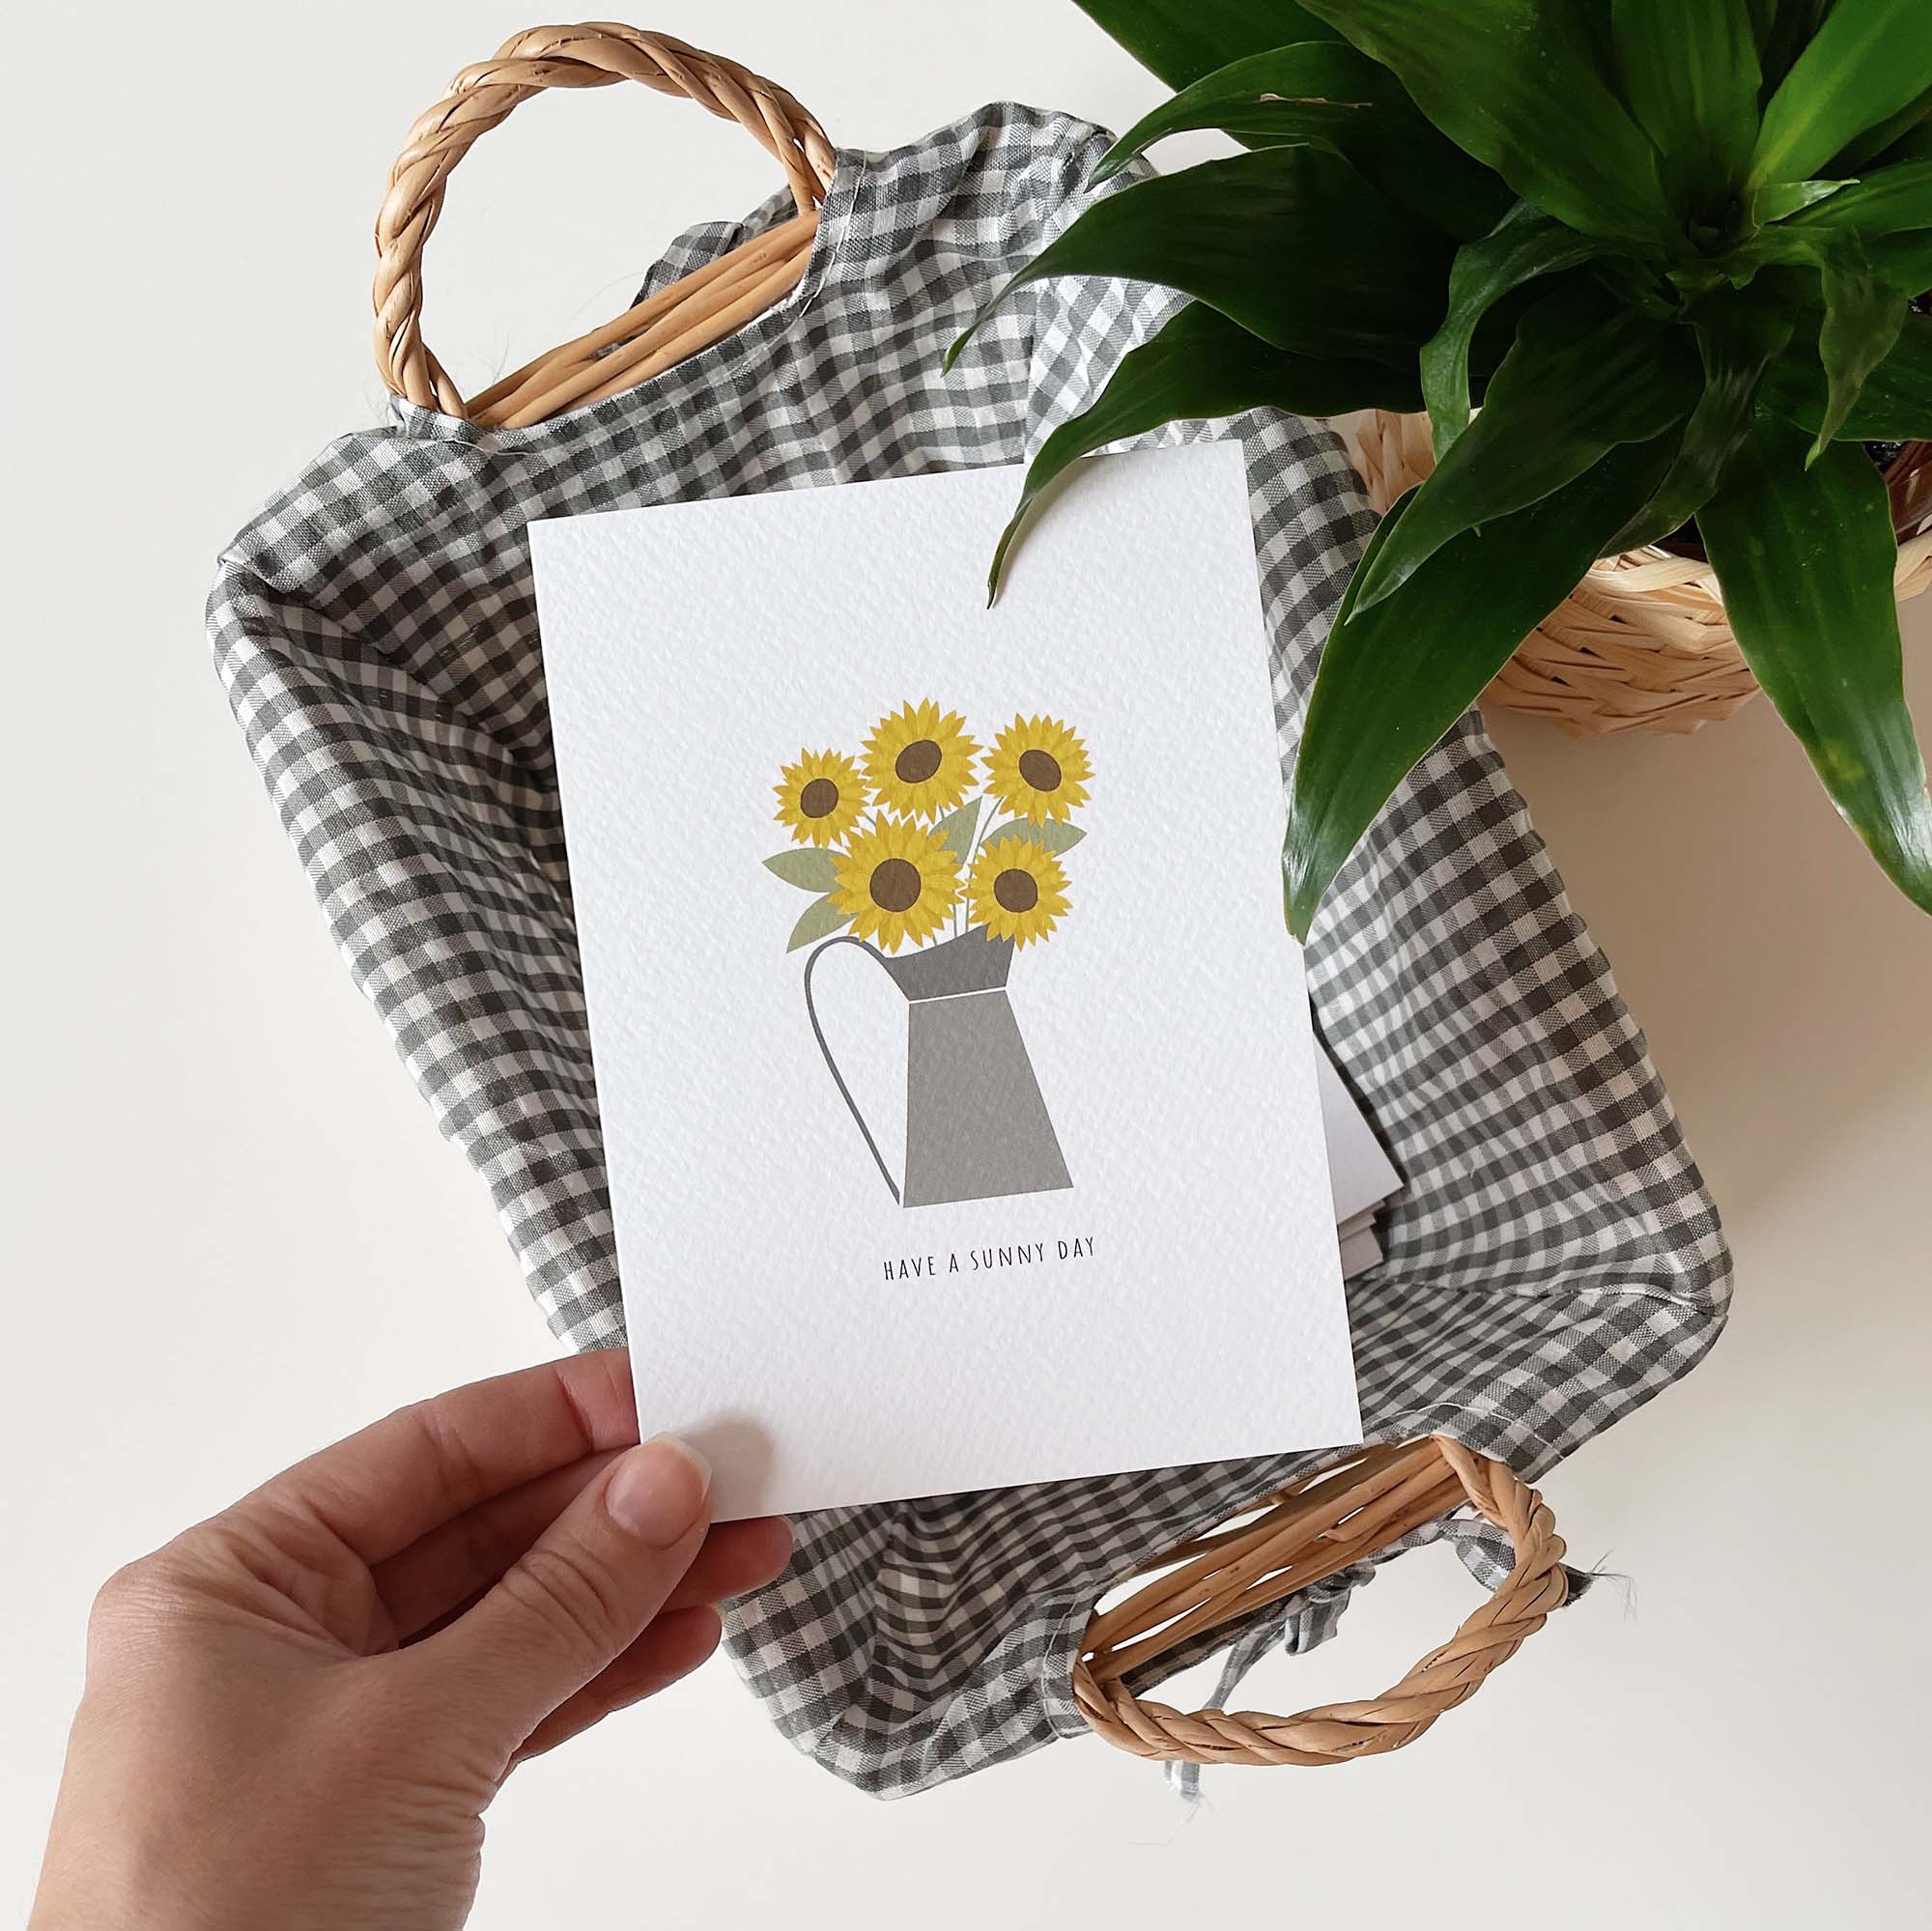 sunflowers greeting card have a sunny day elemente design